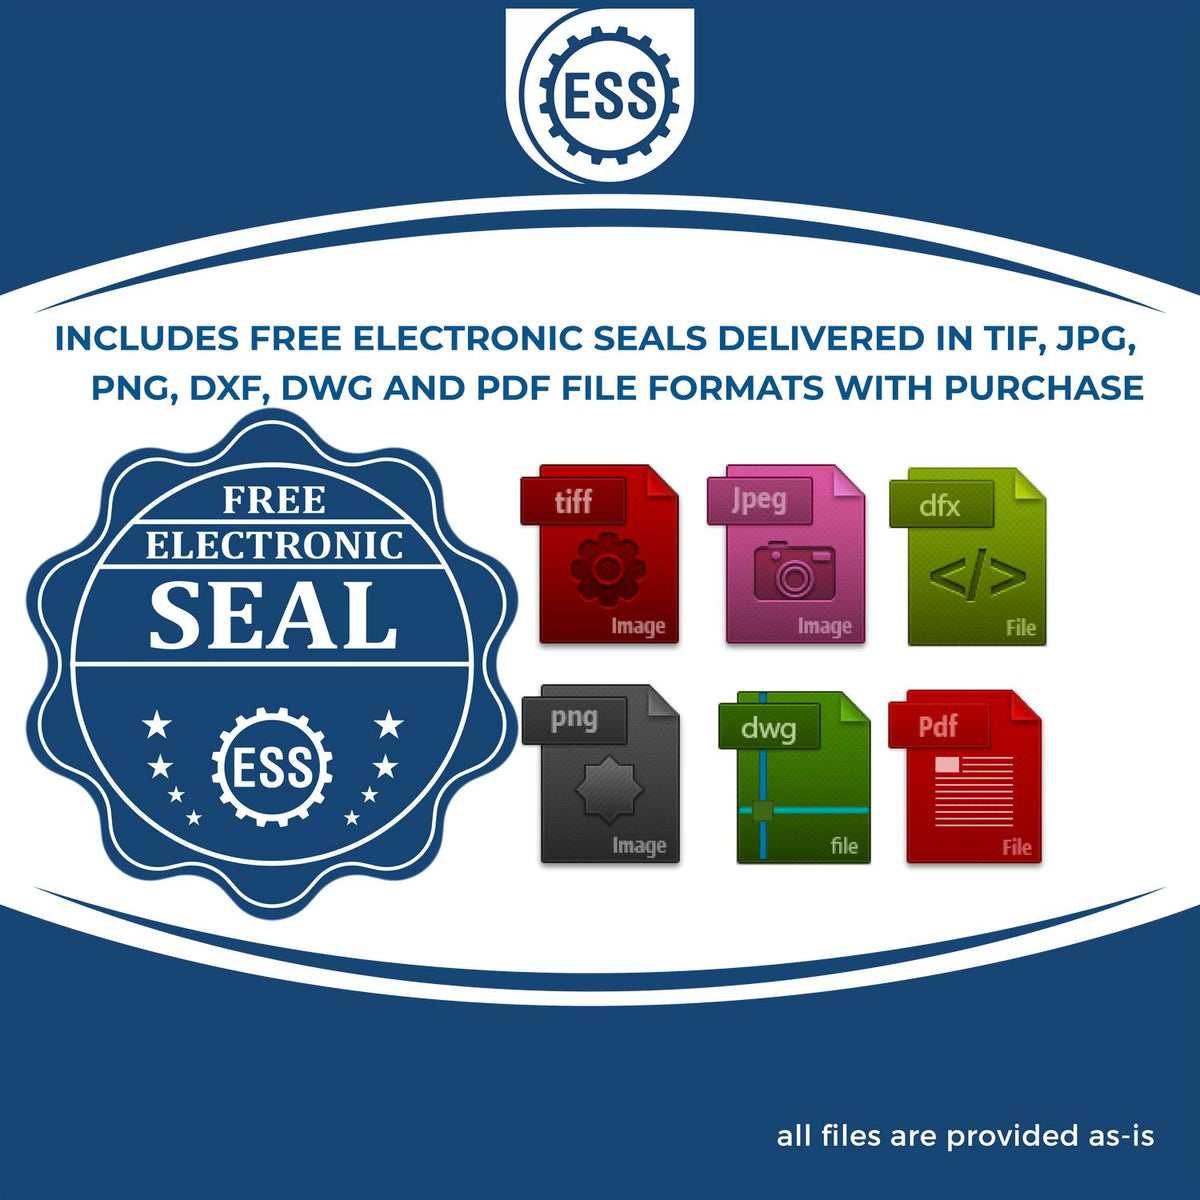 An infographic for the free electronic seal for the New Jersey Geologist Desk Seal illustrating the different file type icons such as DXF, DWG, TIF, JPG and PNG.